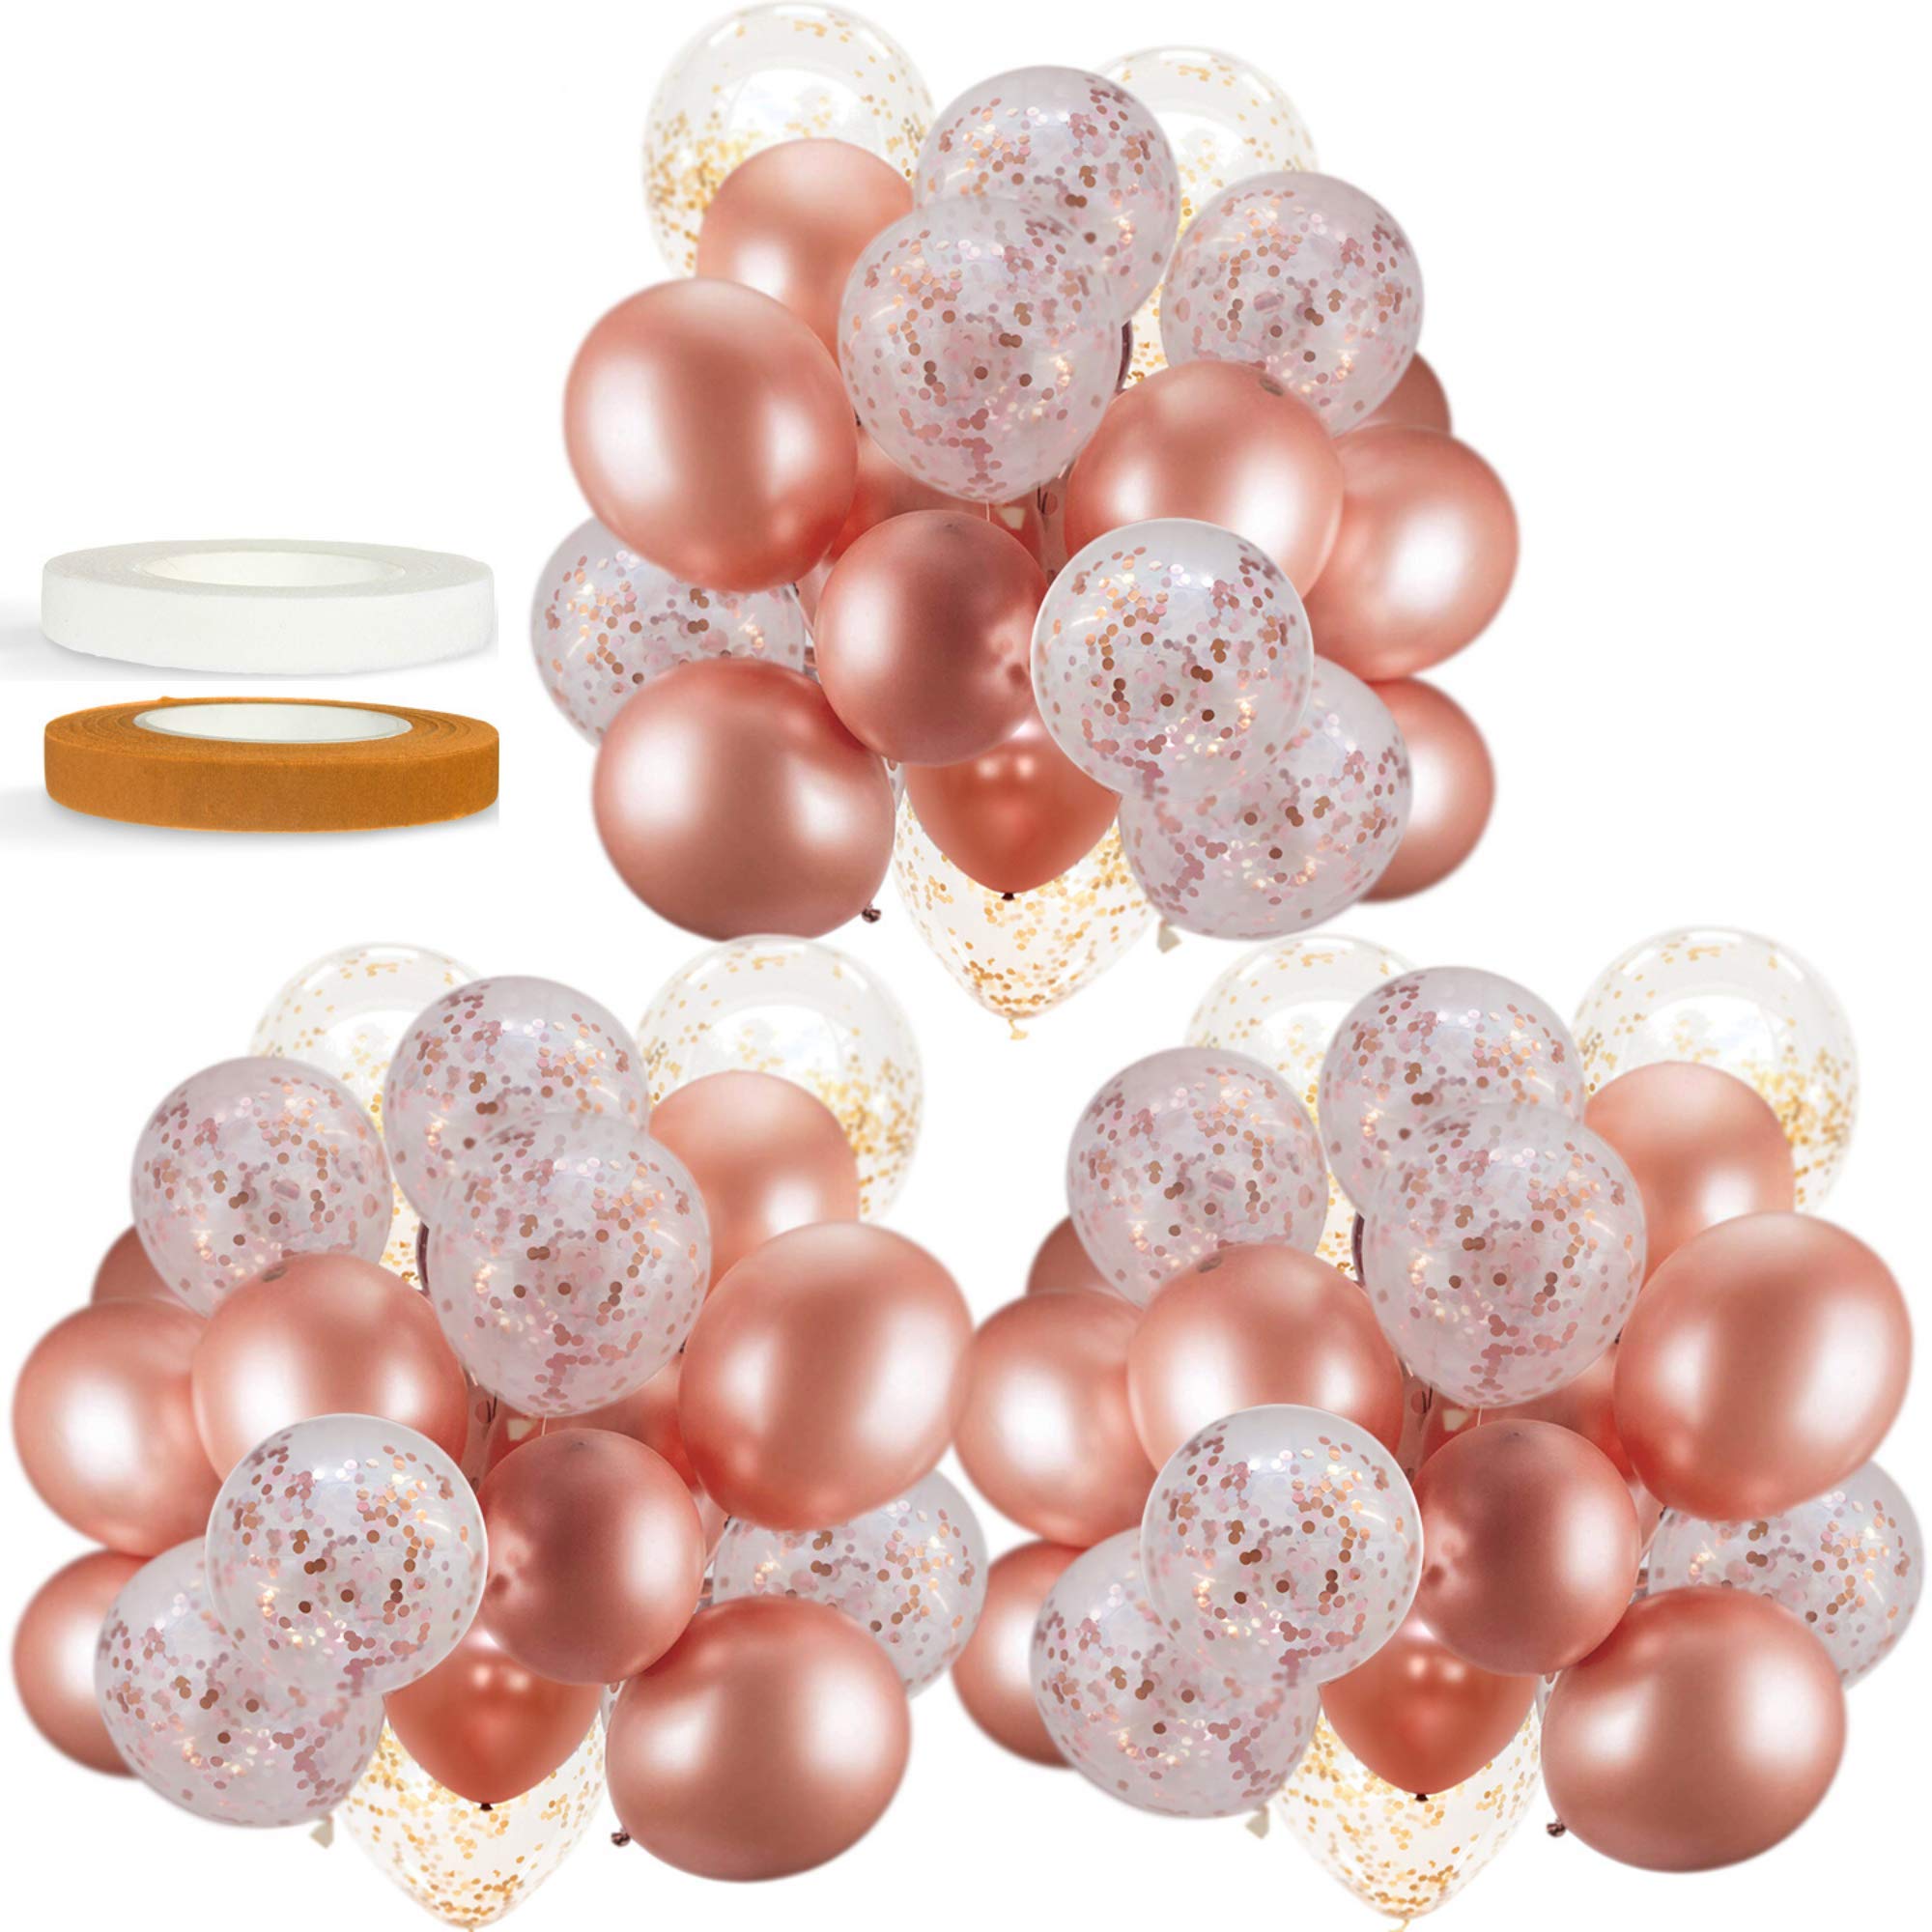 60 PACK Dandy Decor Rose Gold Balloons + Confetti Balloons w/Ribbon | Rosegold Balloons for Parties | Bridal & Baby Shower Balloon Decorations | Latex Party Balloons | Graduation, Engagement, Wedding